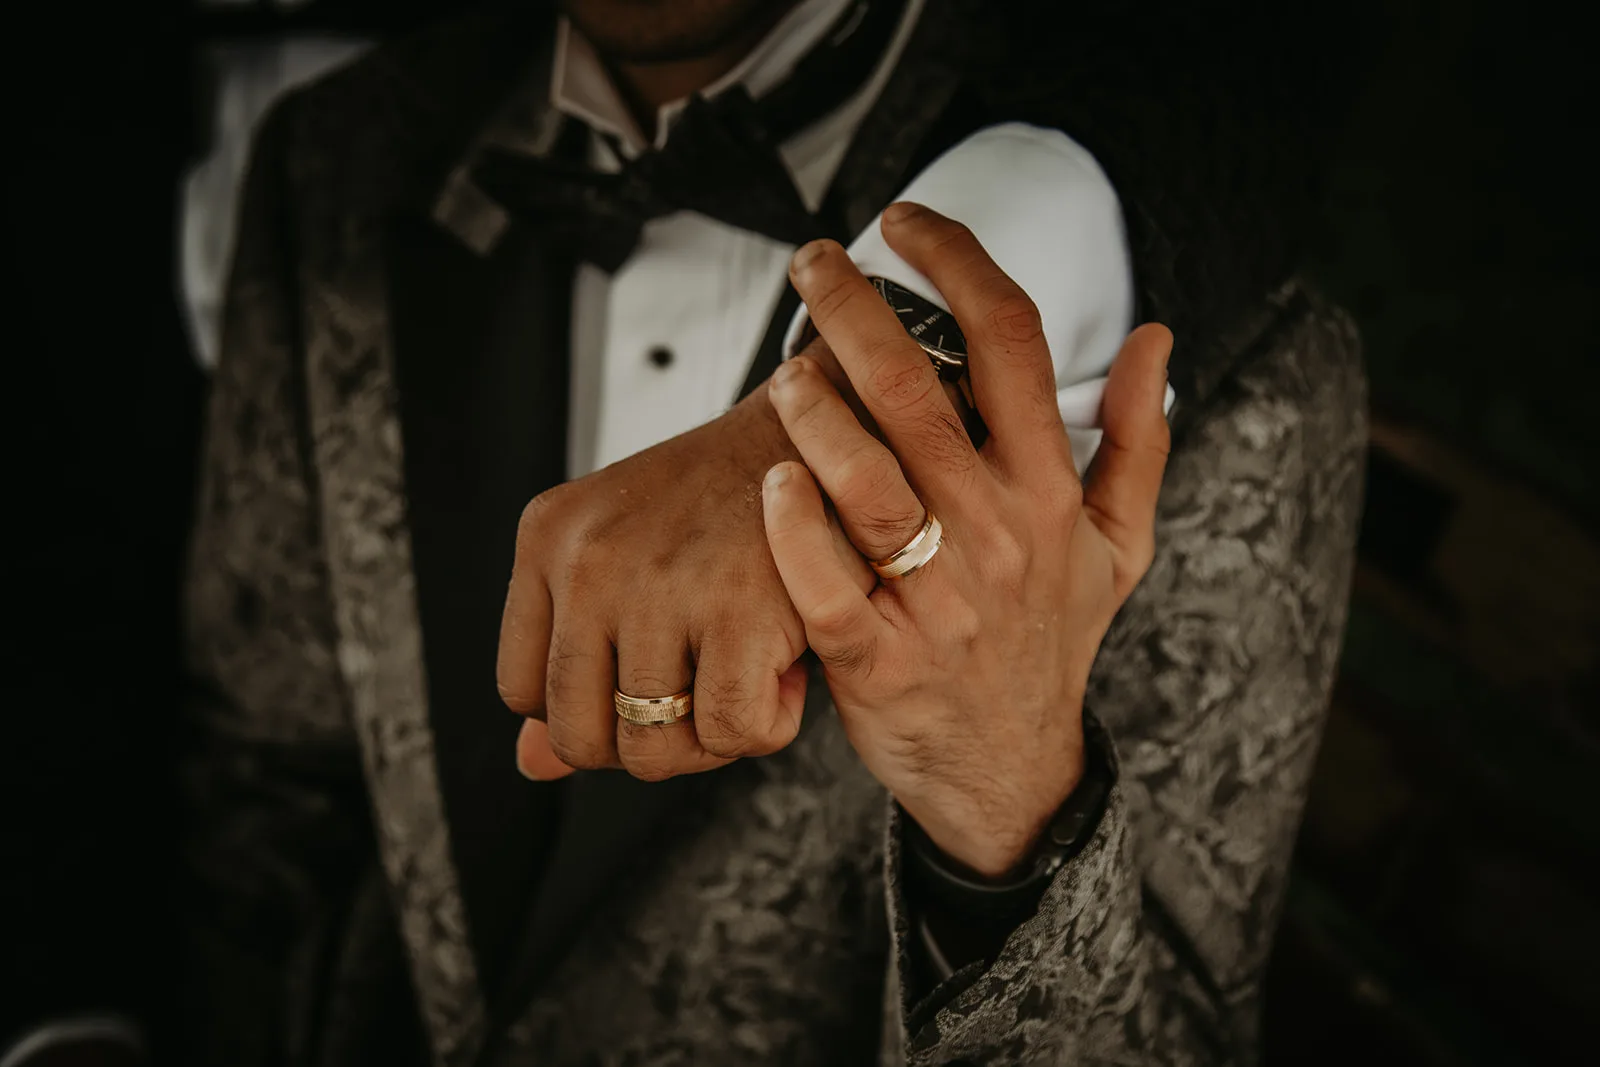 Two grooms holding hands and showing off their wedding rings